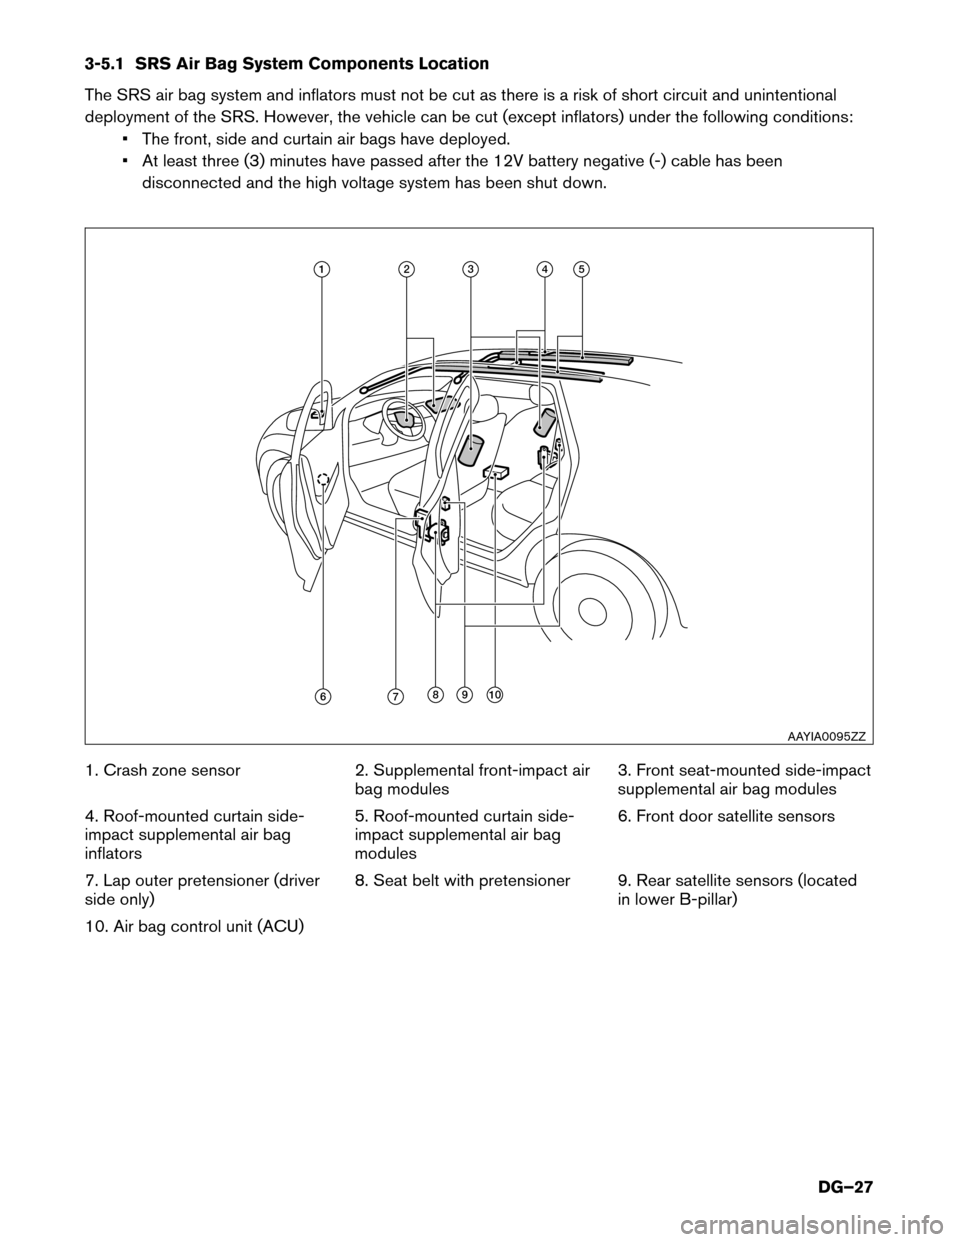 NISSAN LEAF 2014 1.G Dismantling Guide 3-5.1 SRS Air Bag System Components Location
The
SRS air bag system and inflators must not be cut as there is a risk of short circuit and unintentional
deployment of the SRS. However, the vehicle can 